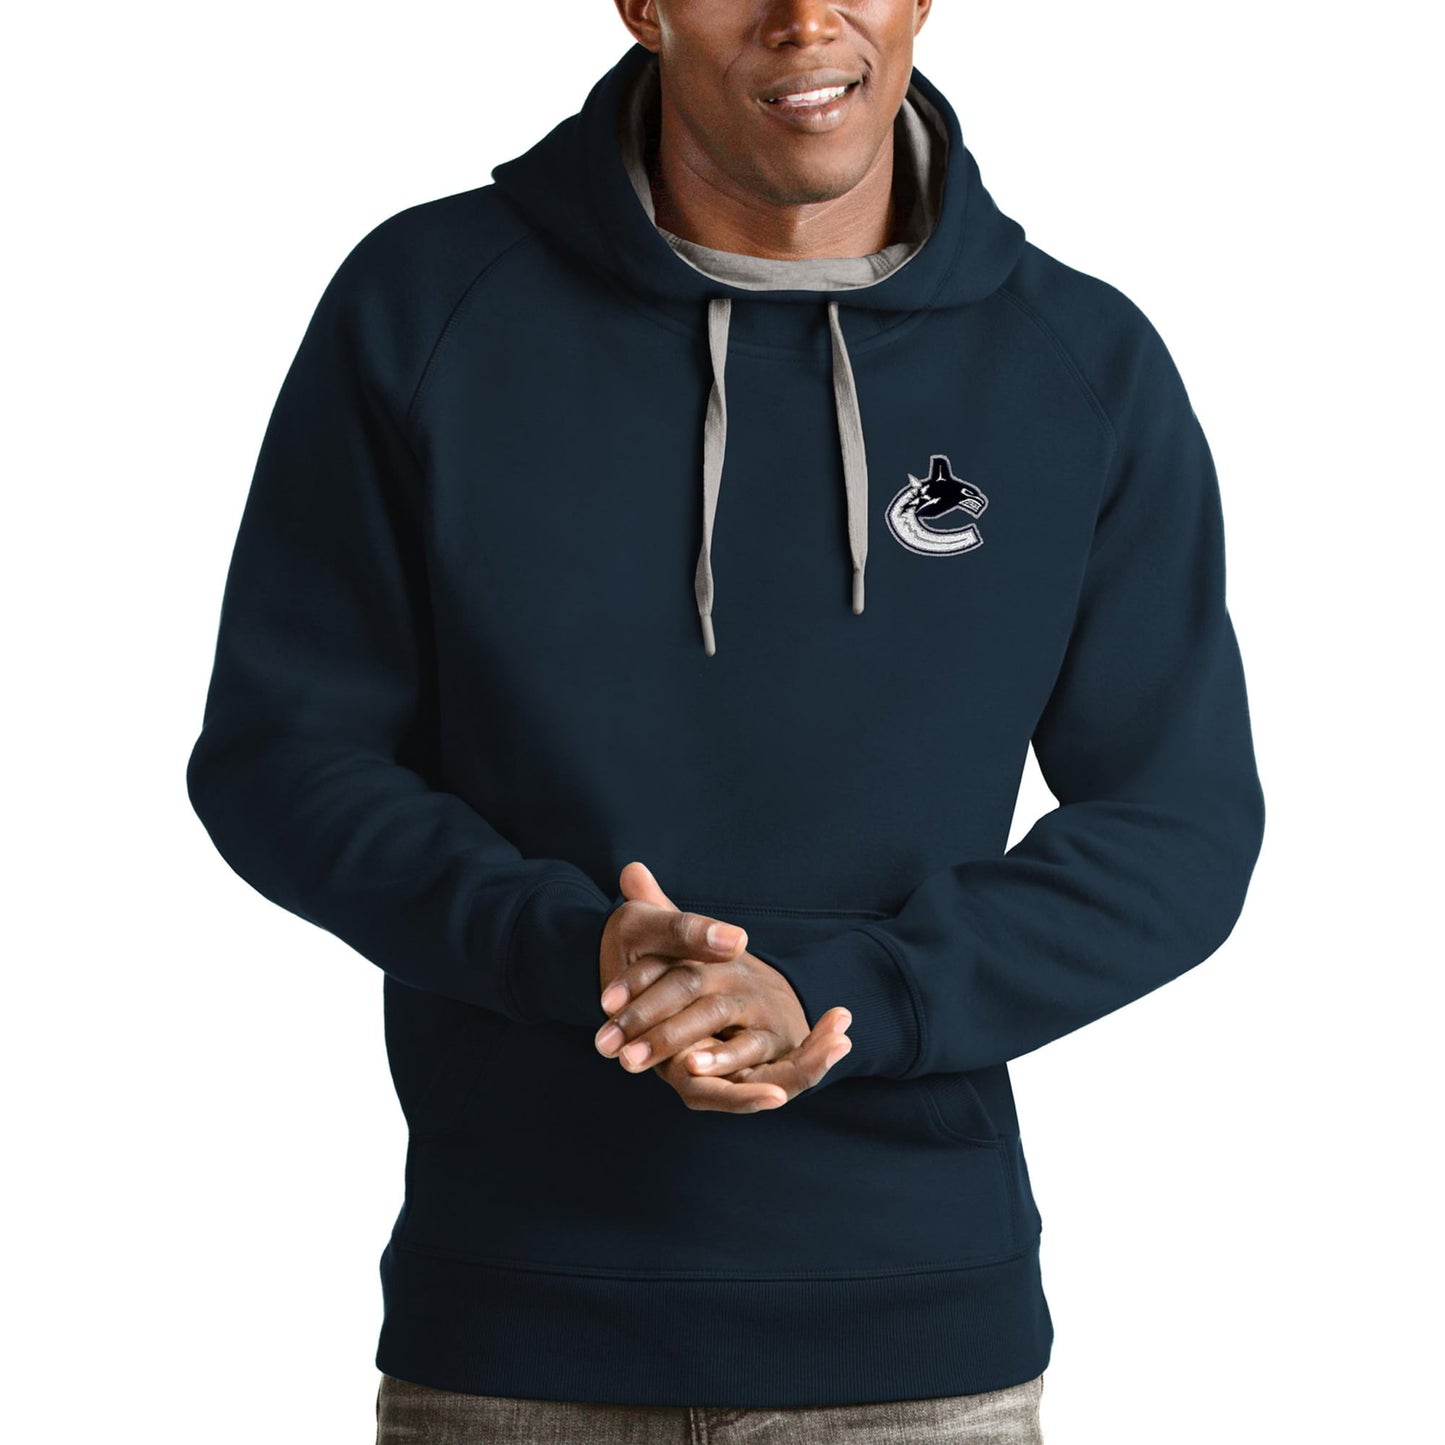 Men's Antigua Navy Vancouver Canucks Team Victory Pullover Hoodie